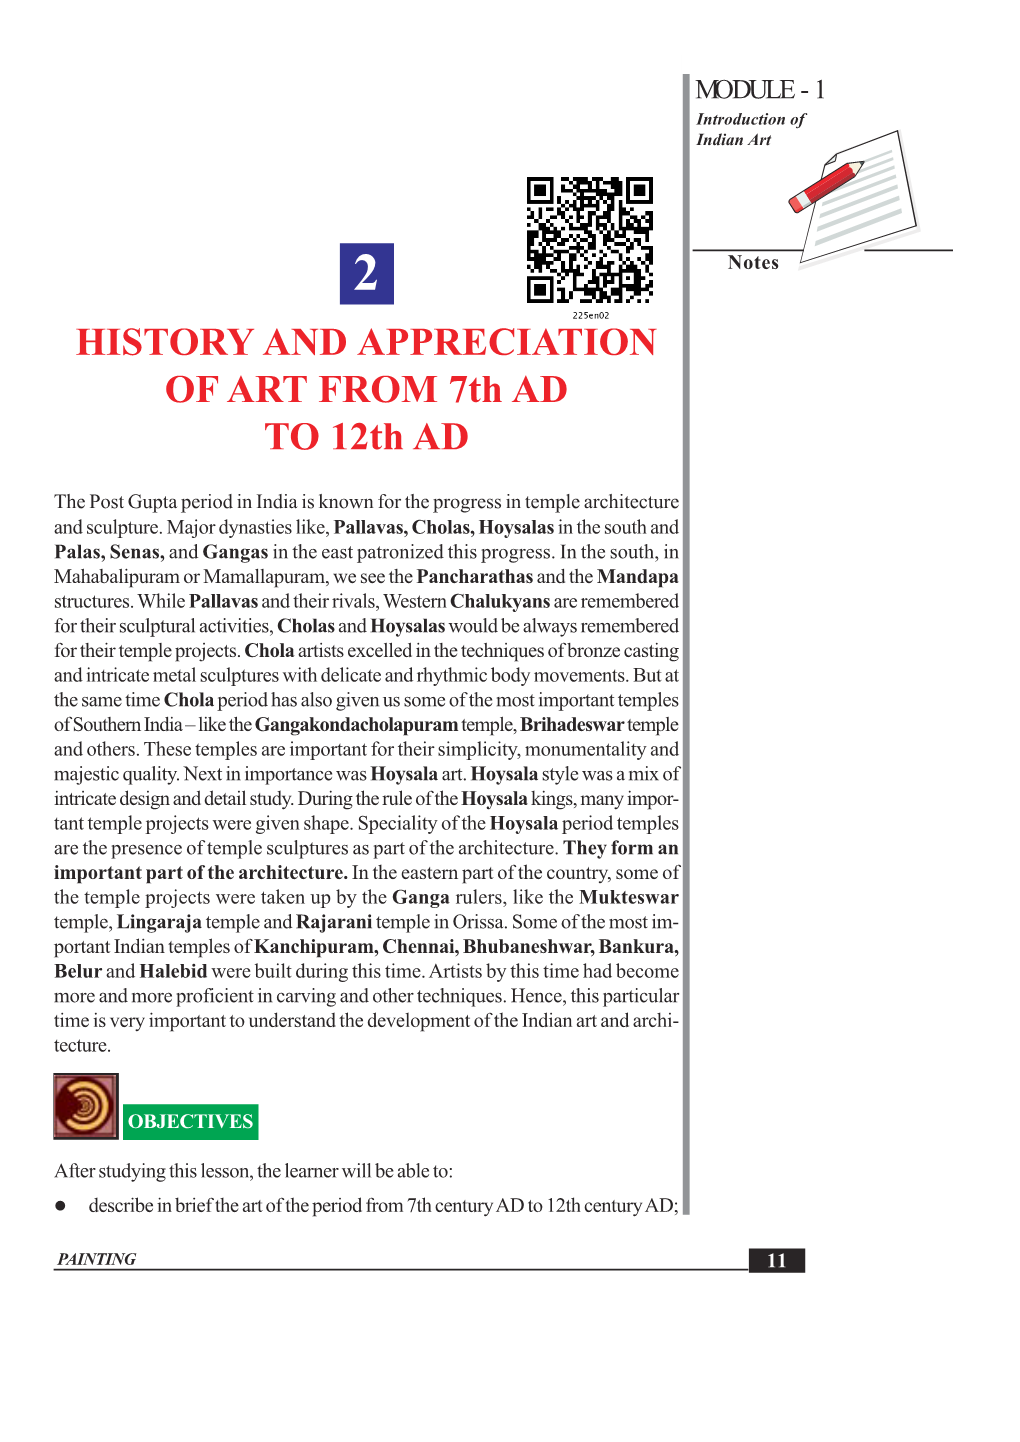 HISTORY and APPRECIATION of ART from 7Th AD to 12Th AD